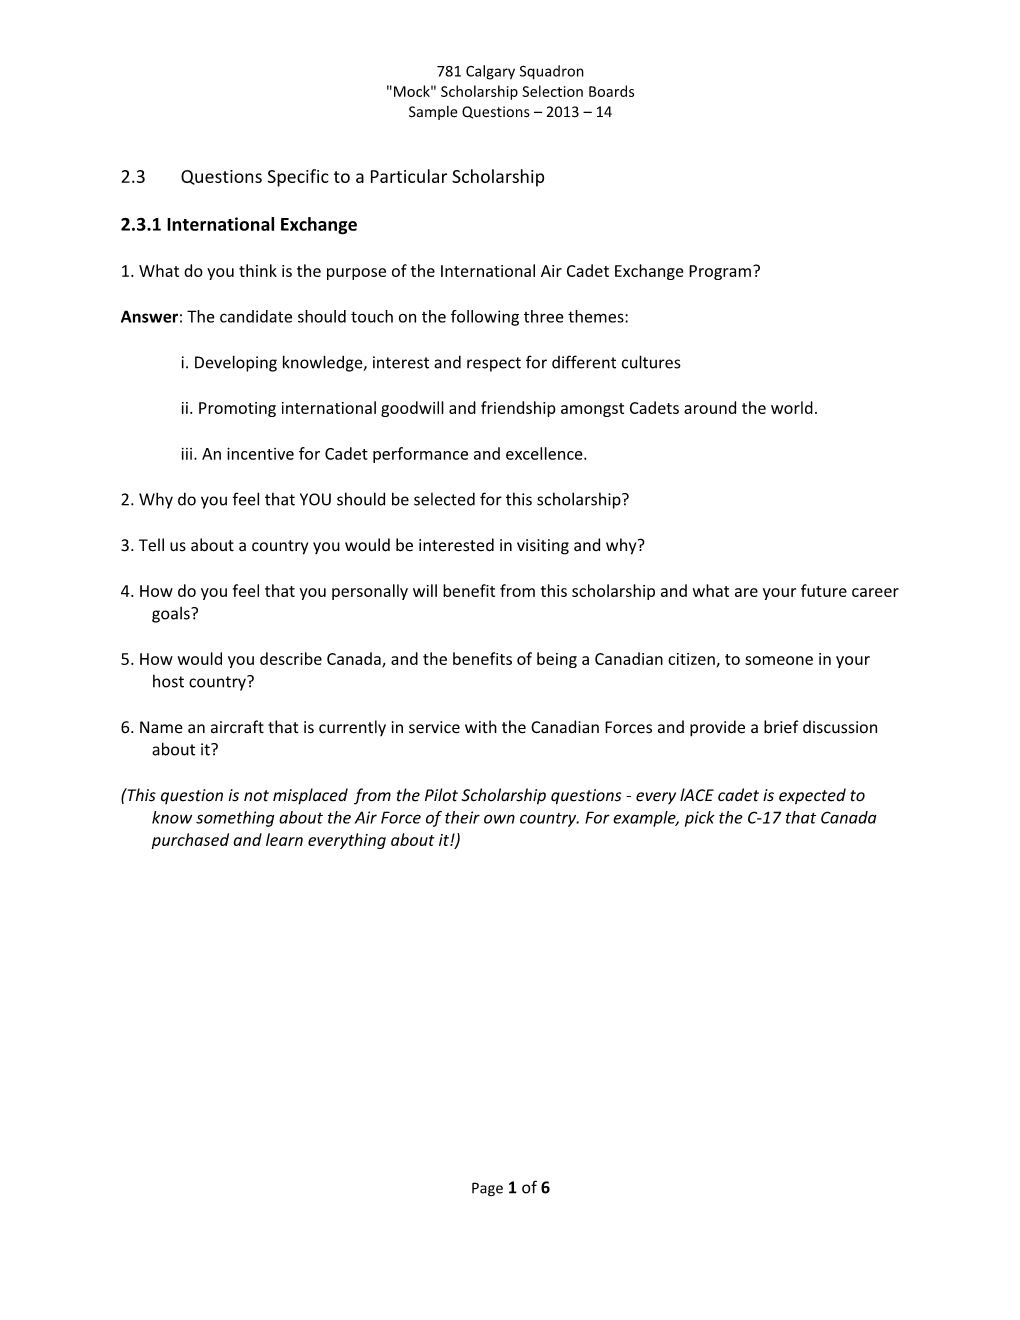 2.3 Questions Specific to a Particular Scholarship 2.3.1 International